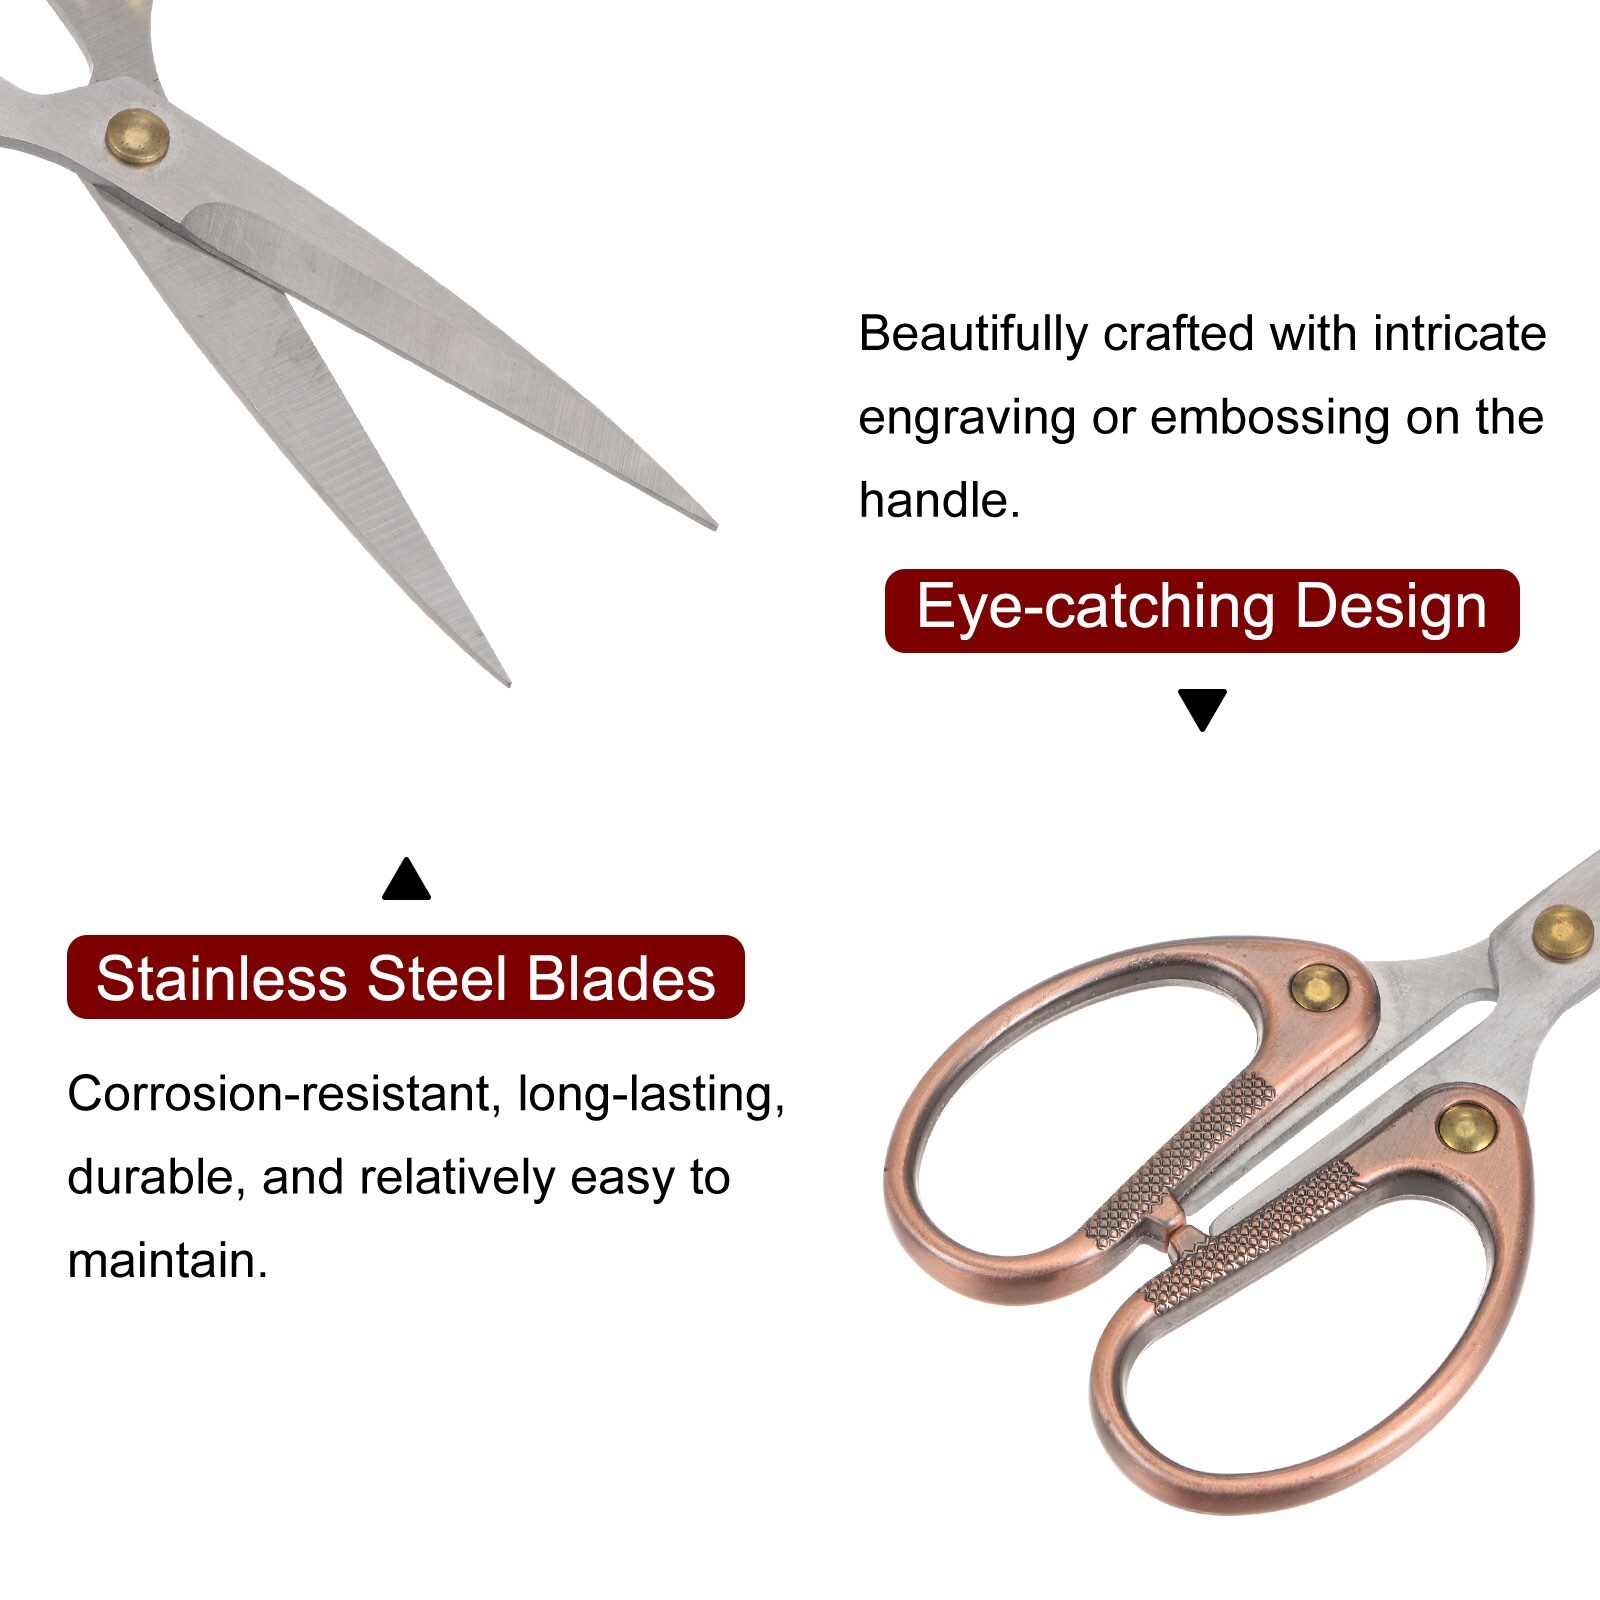 https://ak1.ostkcdn.com/images/products/is/images/direct/2c6b10427f40475040484437af033d33ea09db3d/5.3%22-Stainless-Steel-Vintage-Scissors-for-Embroidery-Sewing-Craft-Copper-Tone.jpg